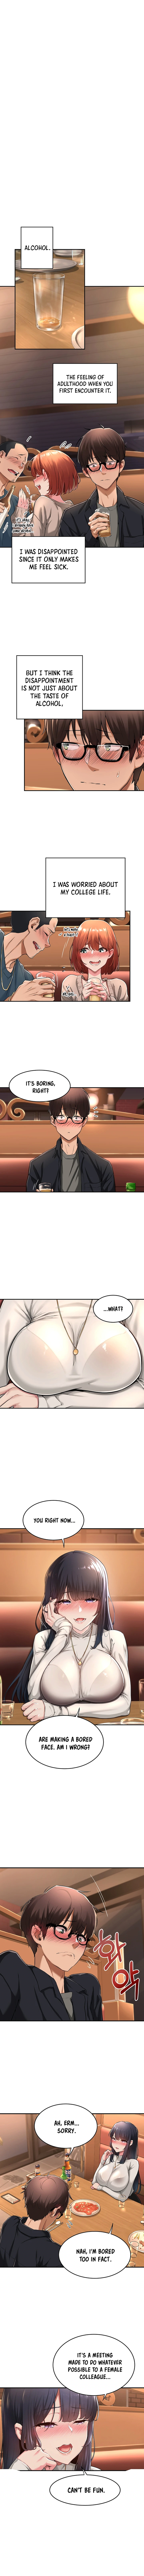 Panel Image 1 for chapter 1 of manhwa Sex Study Group on read.oppai.stream